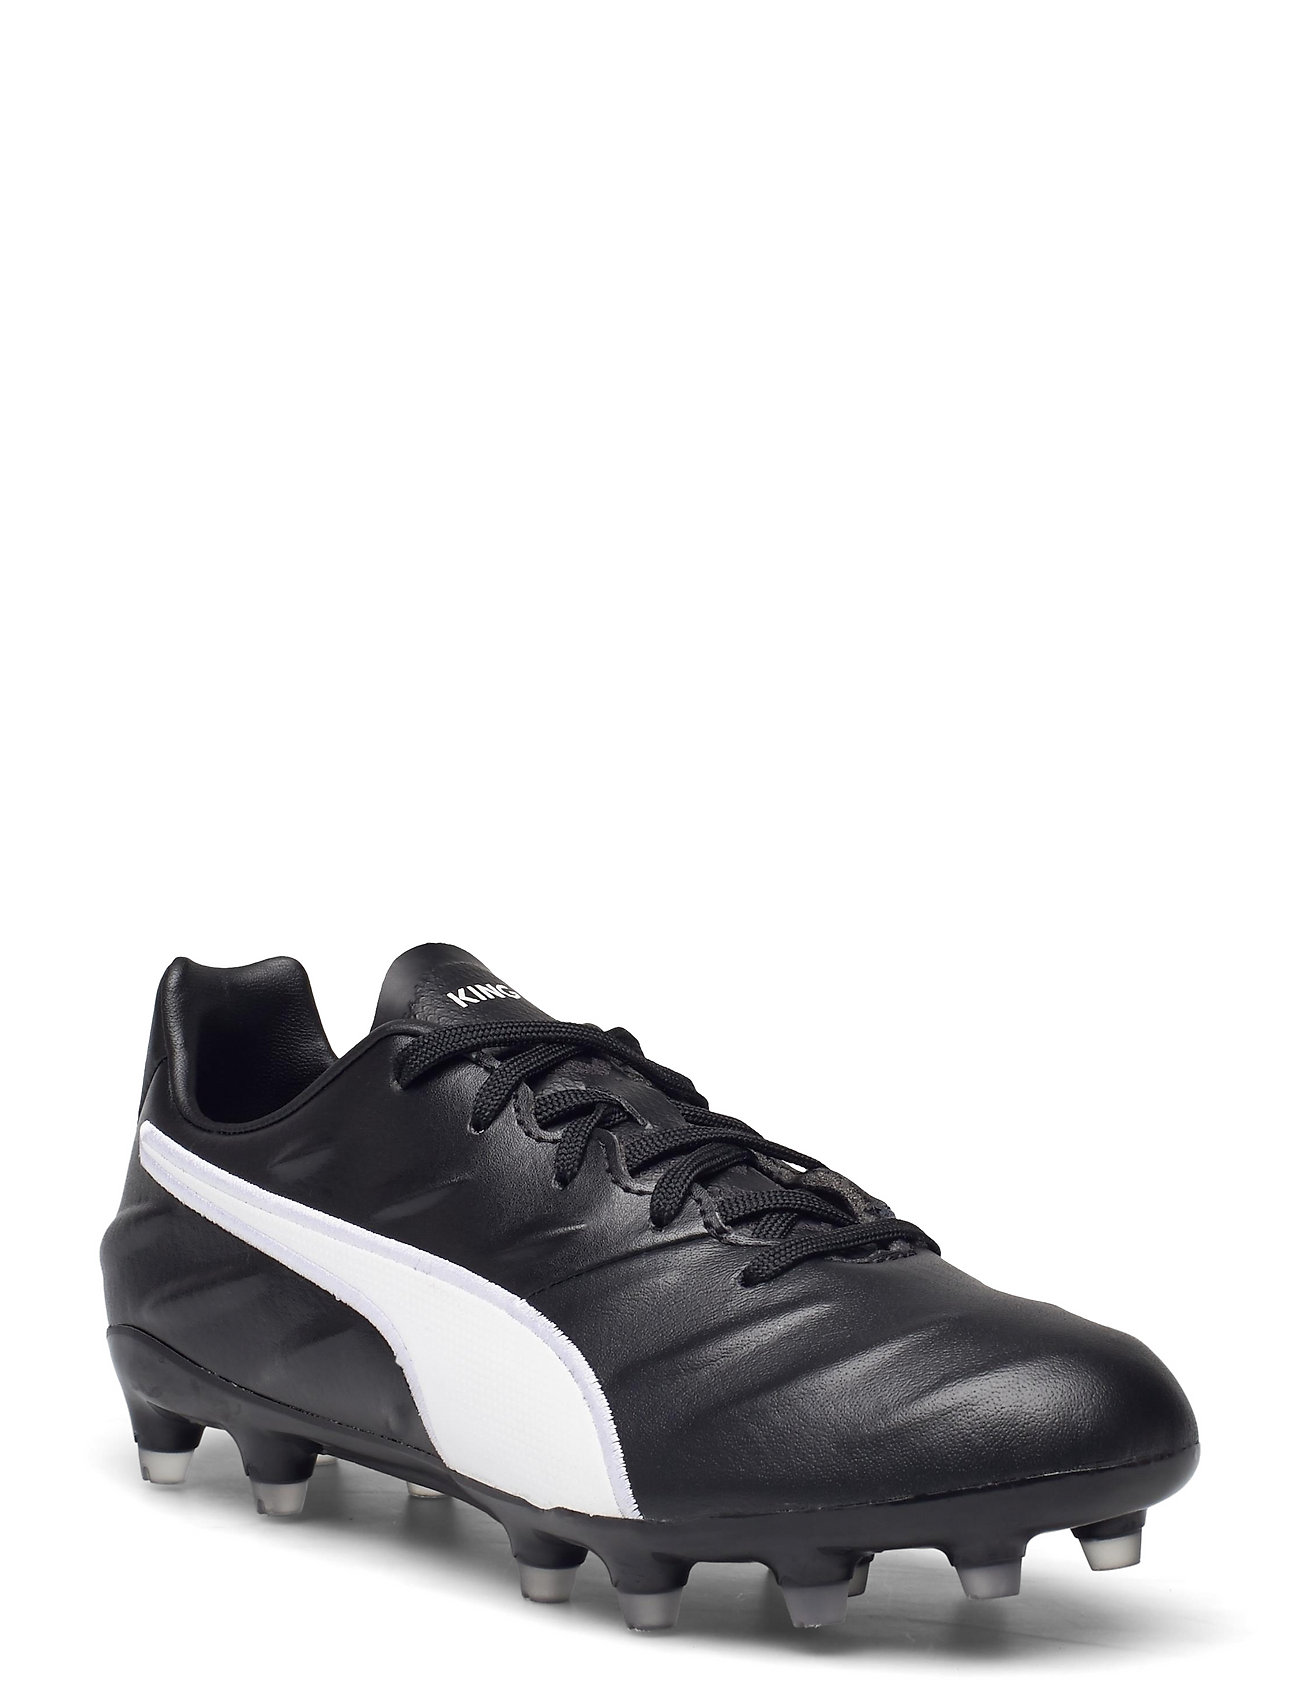 King Pro 21 Fg Shoes Sport Shoes Football Boots Musta PUMA